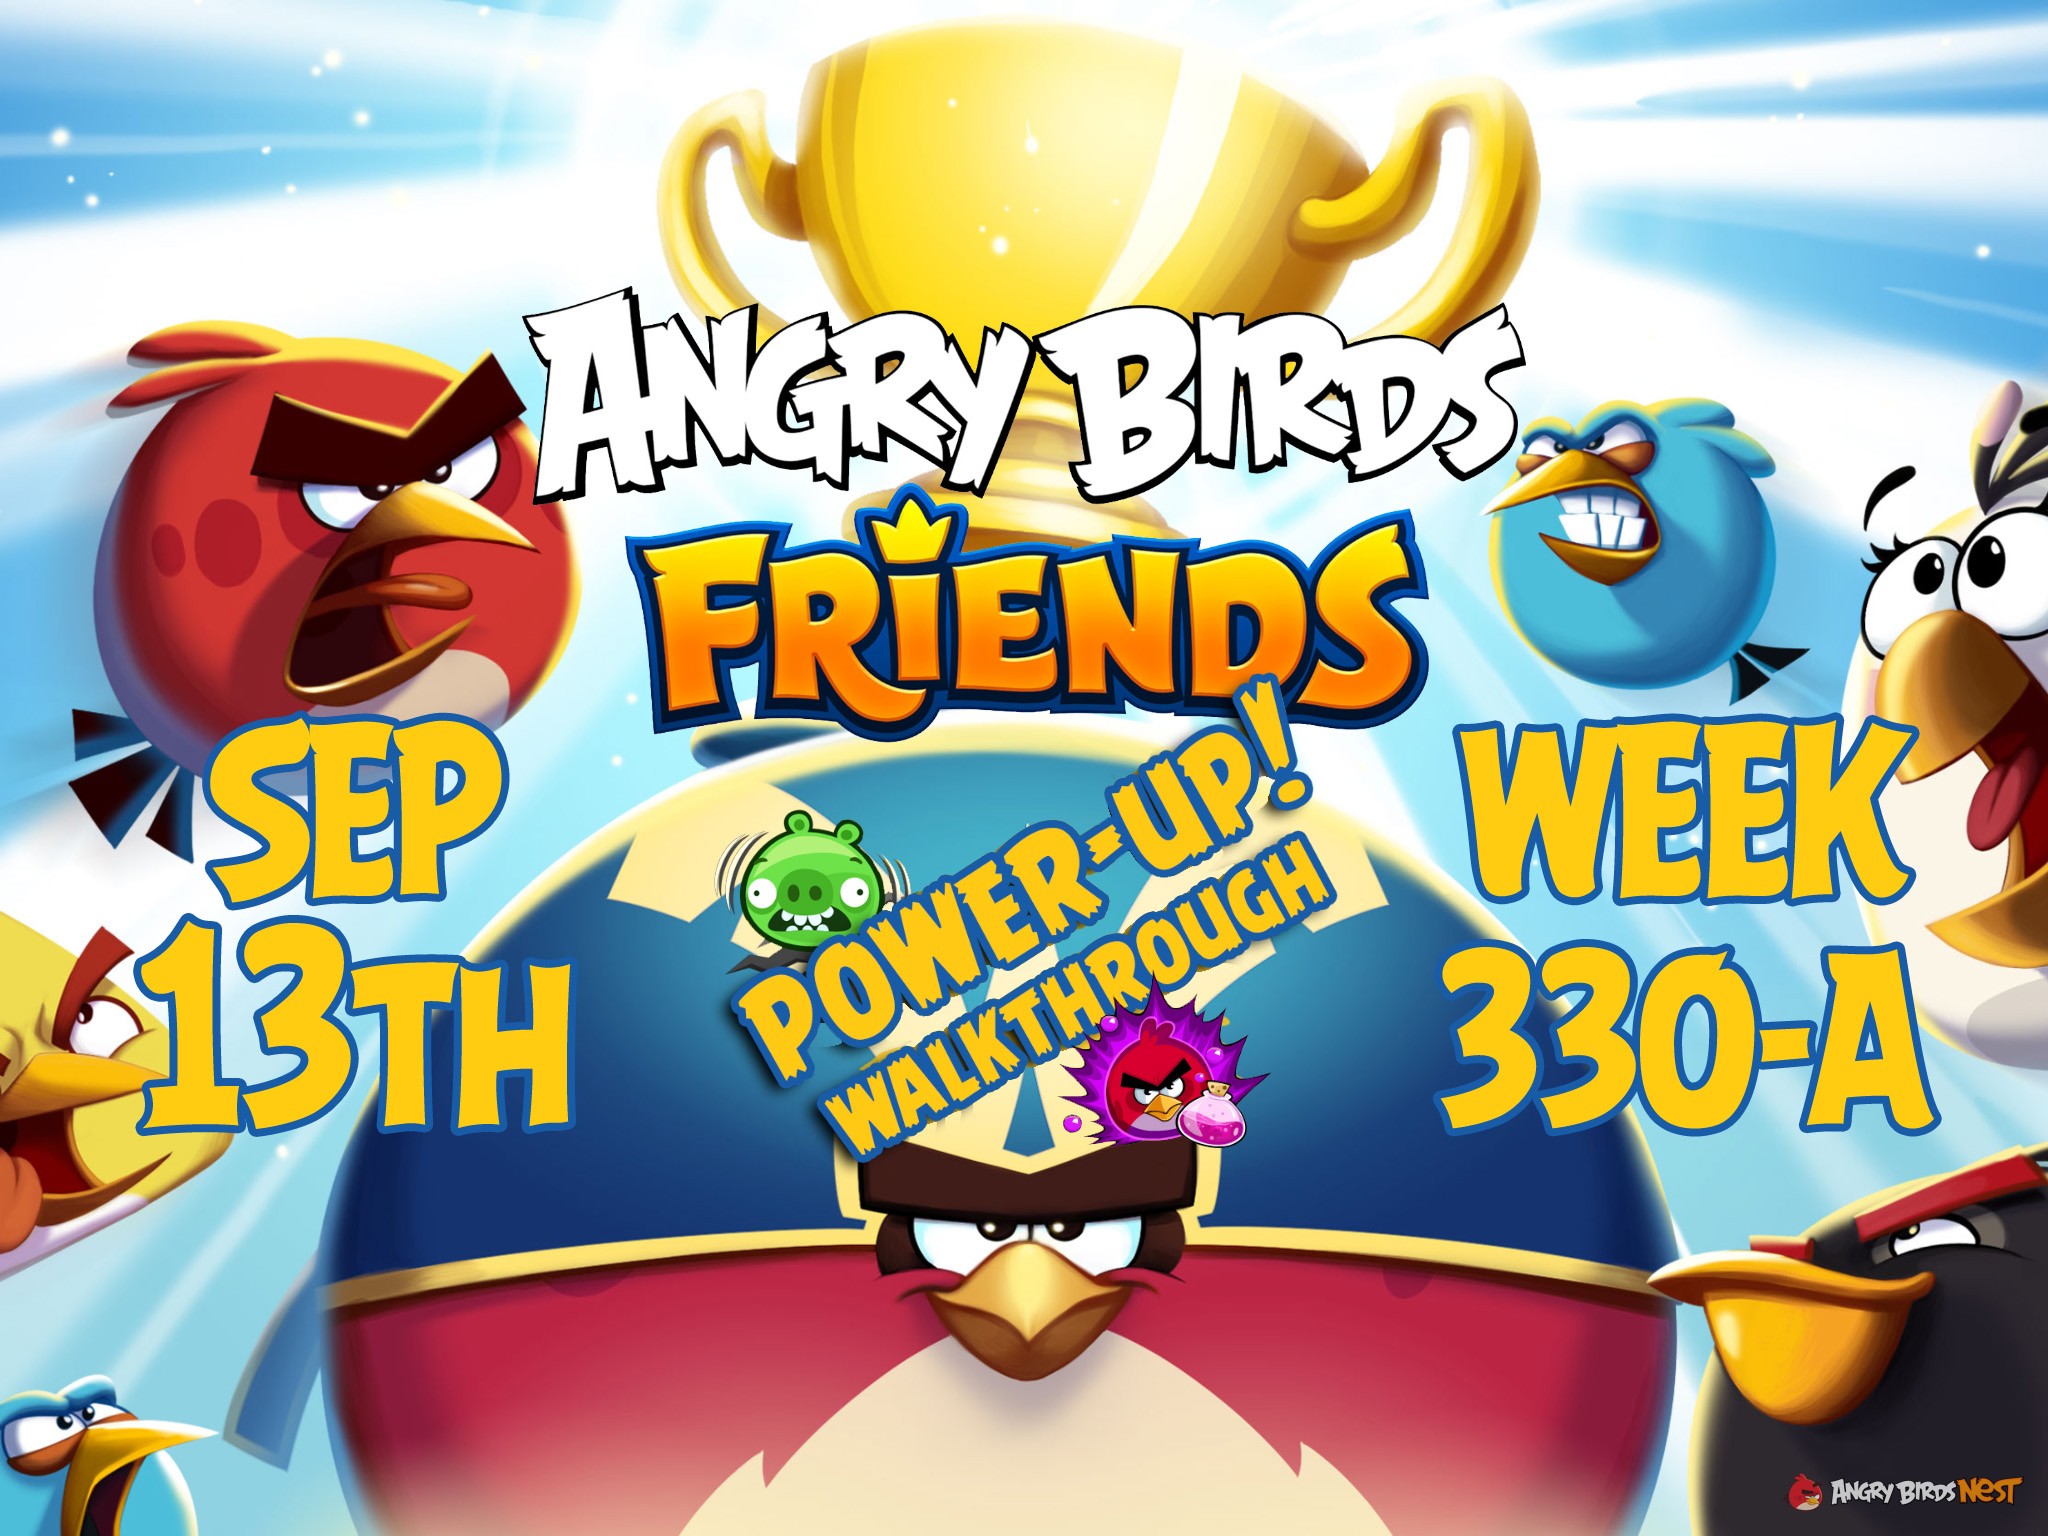 Angry-Birds-Friends-Tournament-Week-330-A-Feature-Image-PU